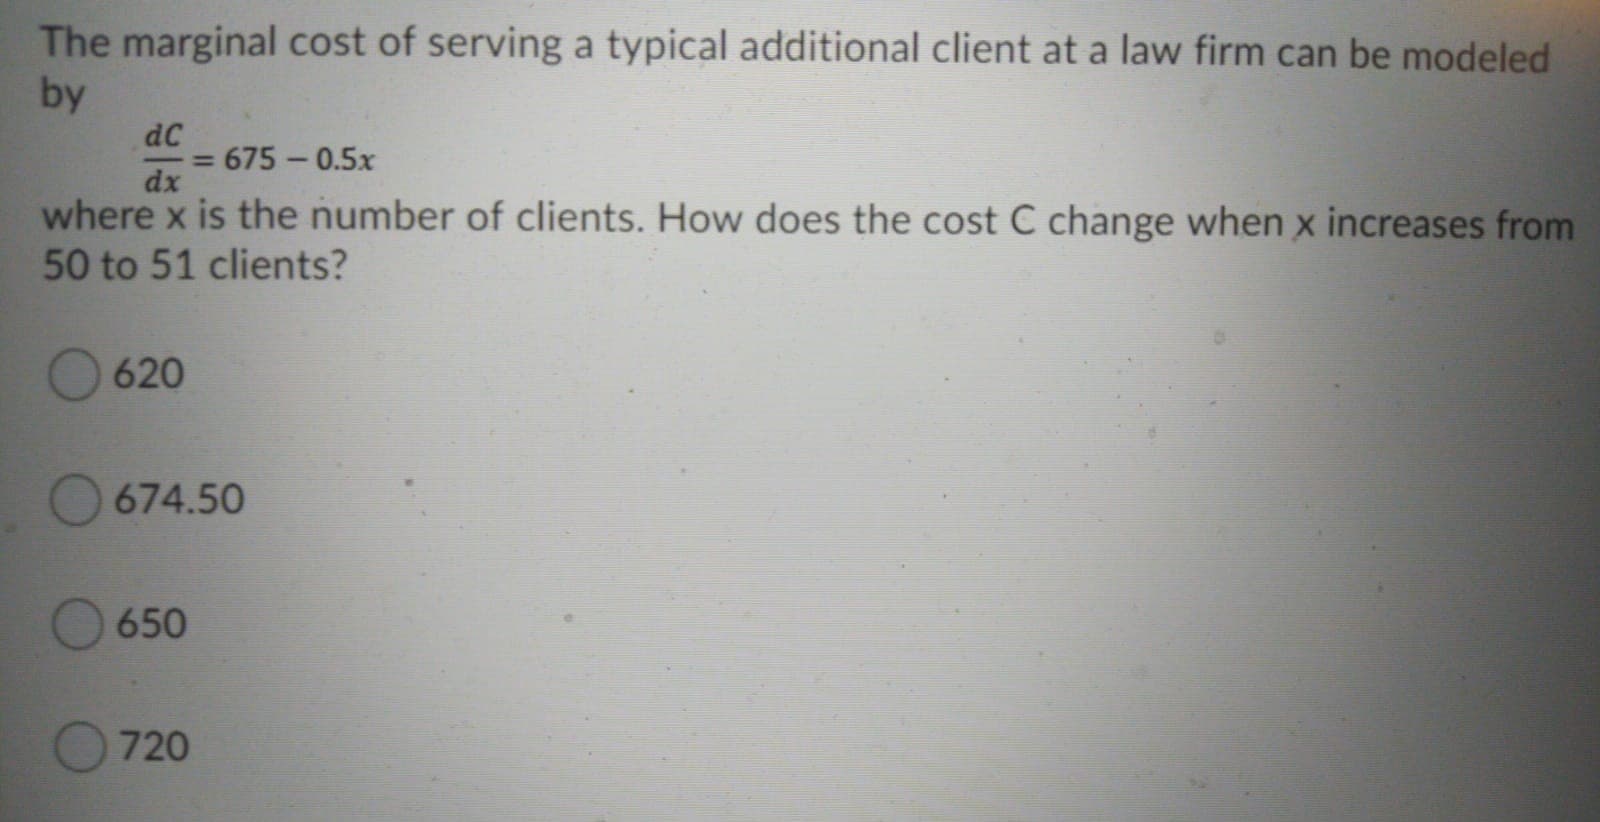 The marginal cost of serving a typical additional client at a law firm can be modeled
by
dC
675 -0.5x
%3D
dx
where x is the number of clients. How does the cost C change when x increases from
50 to 51 clients?
